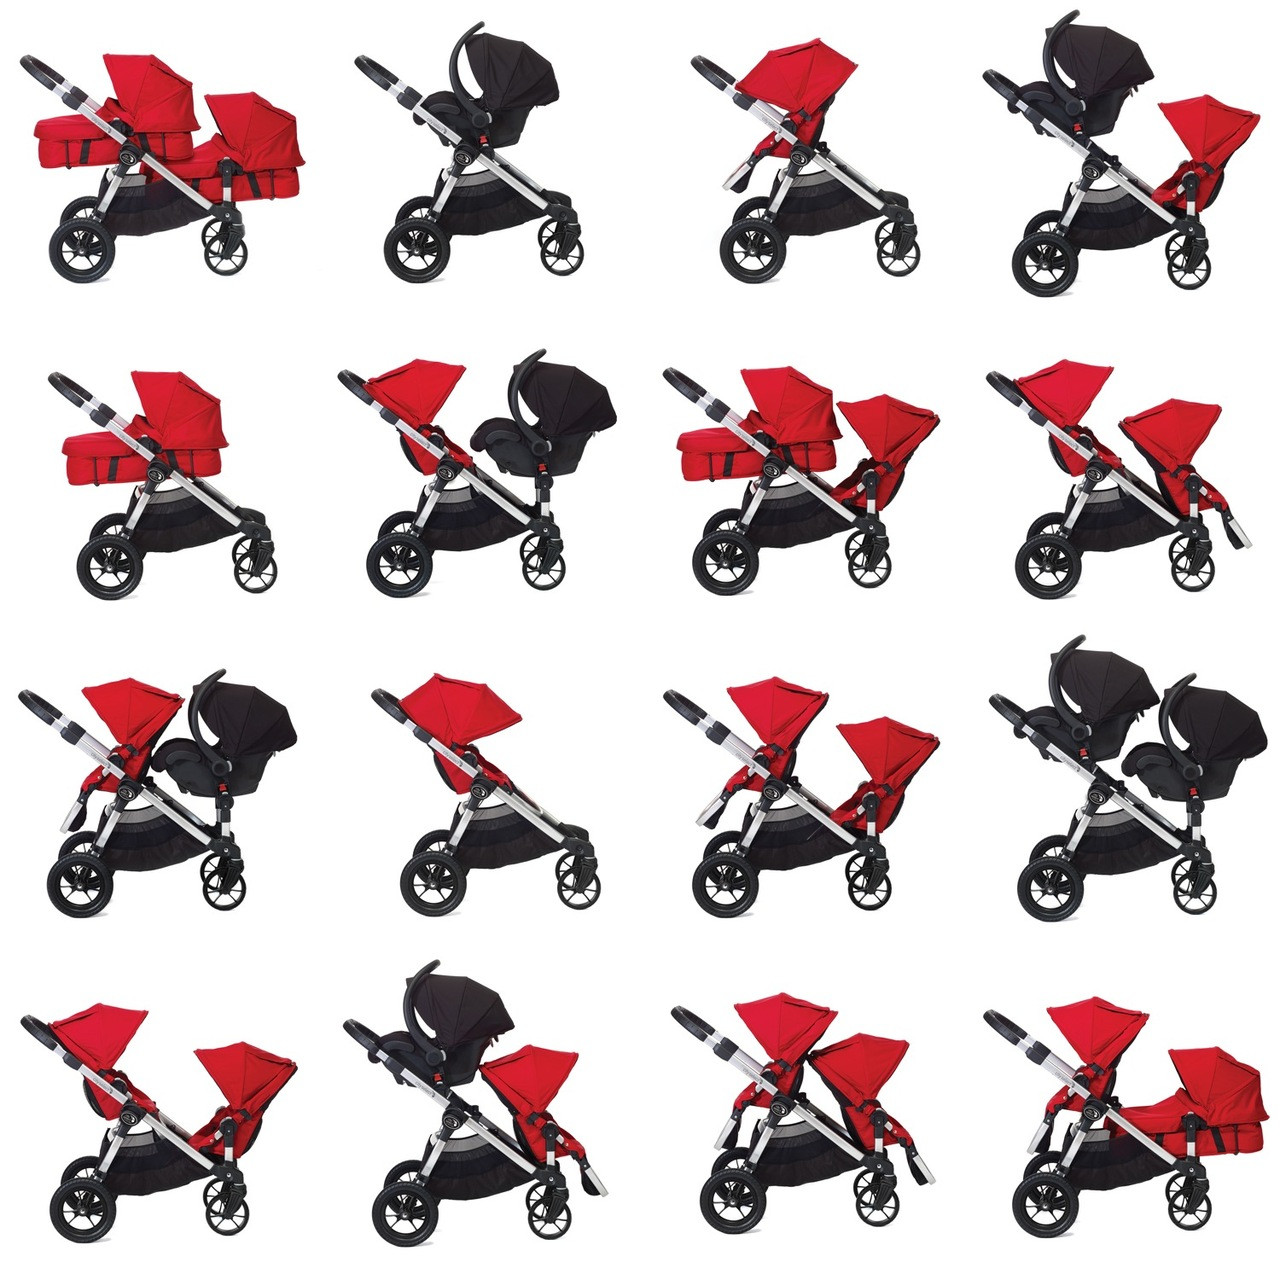 Baby Jogger Select Stroller 2018 in Ruby Red SHIPS NOW - City Select Strollers